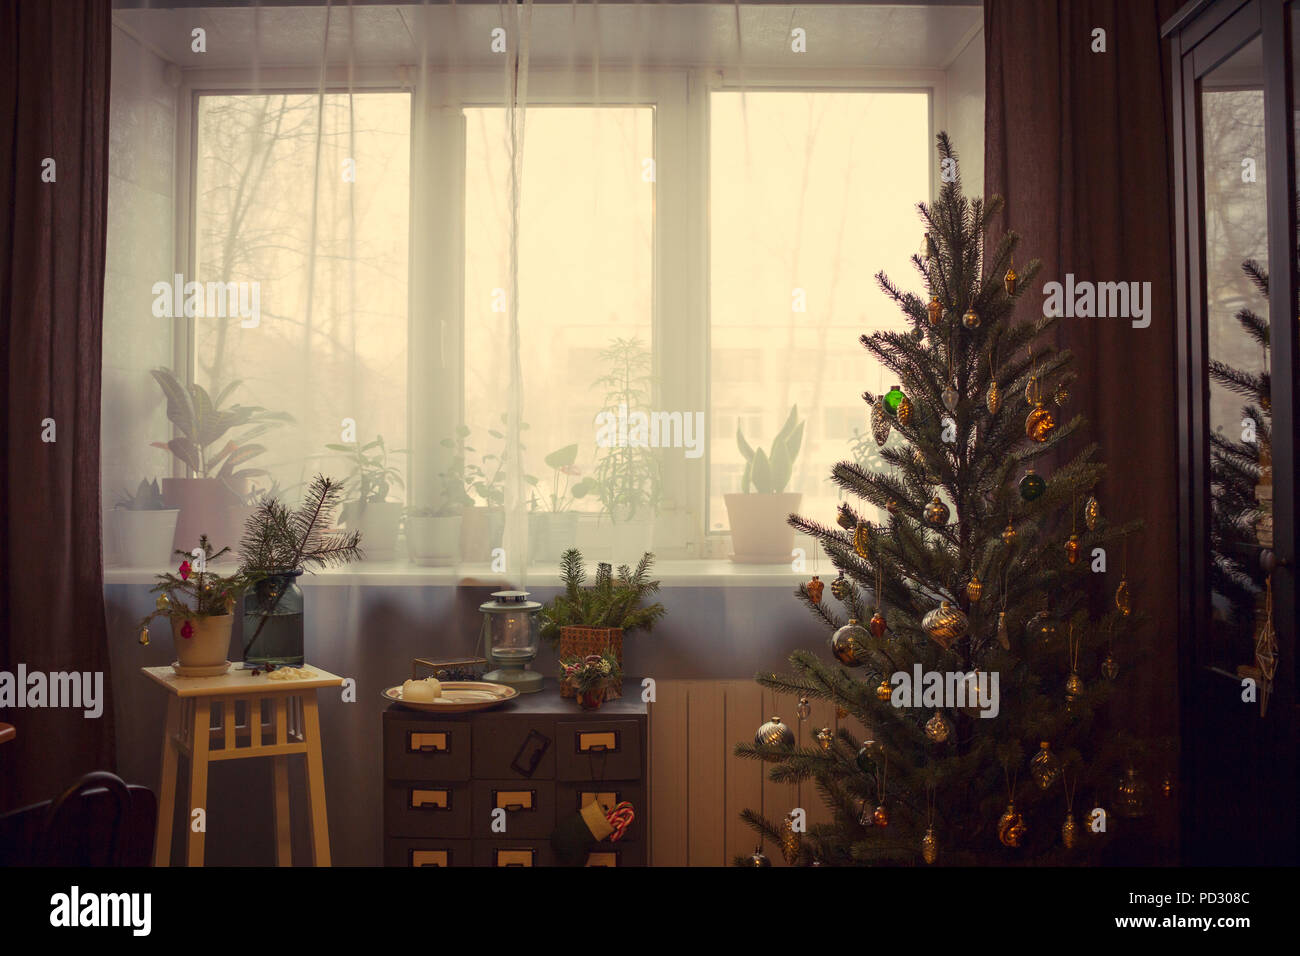 Christmas tree and potted plants by window Stock Photo